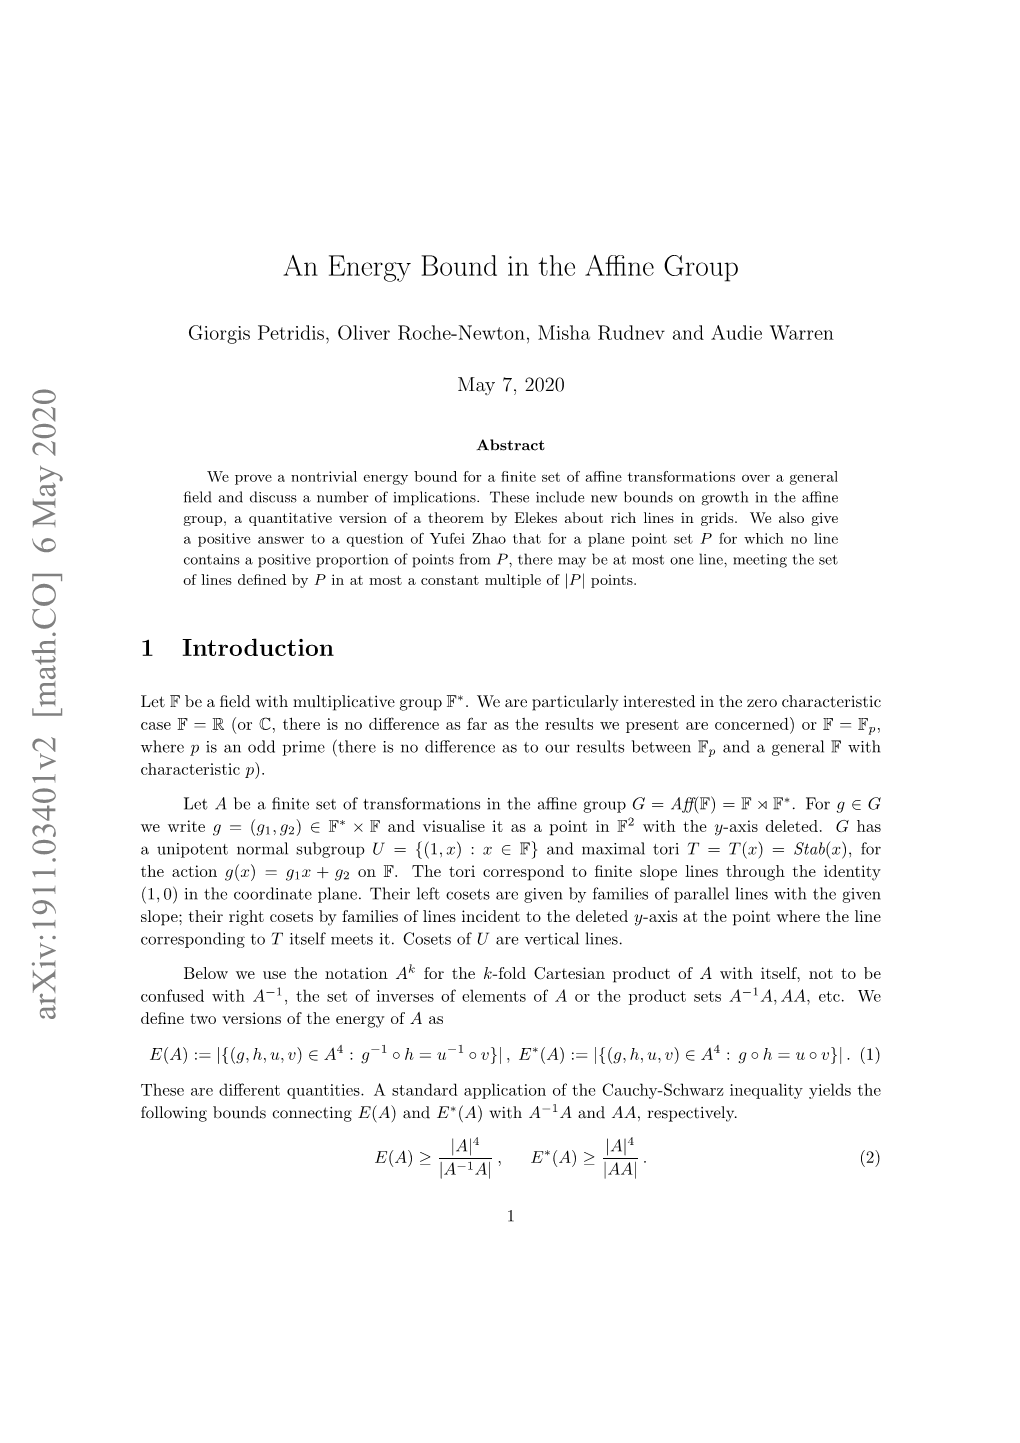 An Energy Bound in the Affine Group